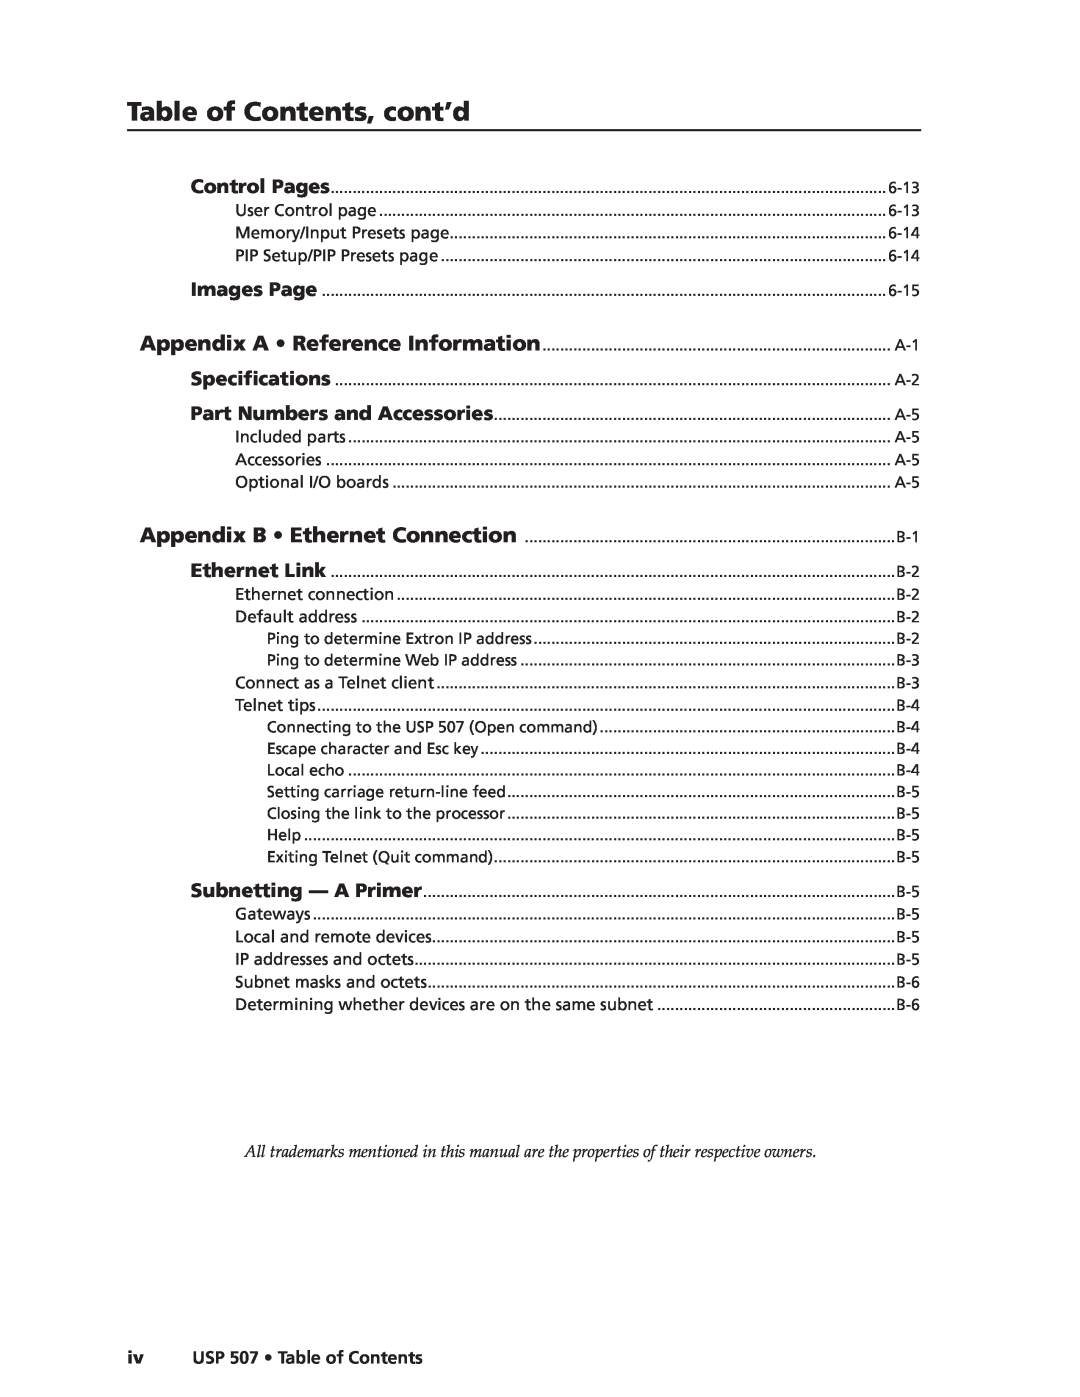 Extron electronic manual Table of Contents, cont’d, ivUSP 507 • Table of Contents 